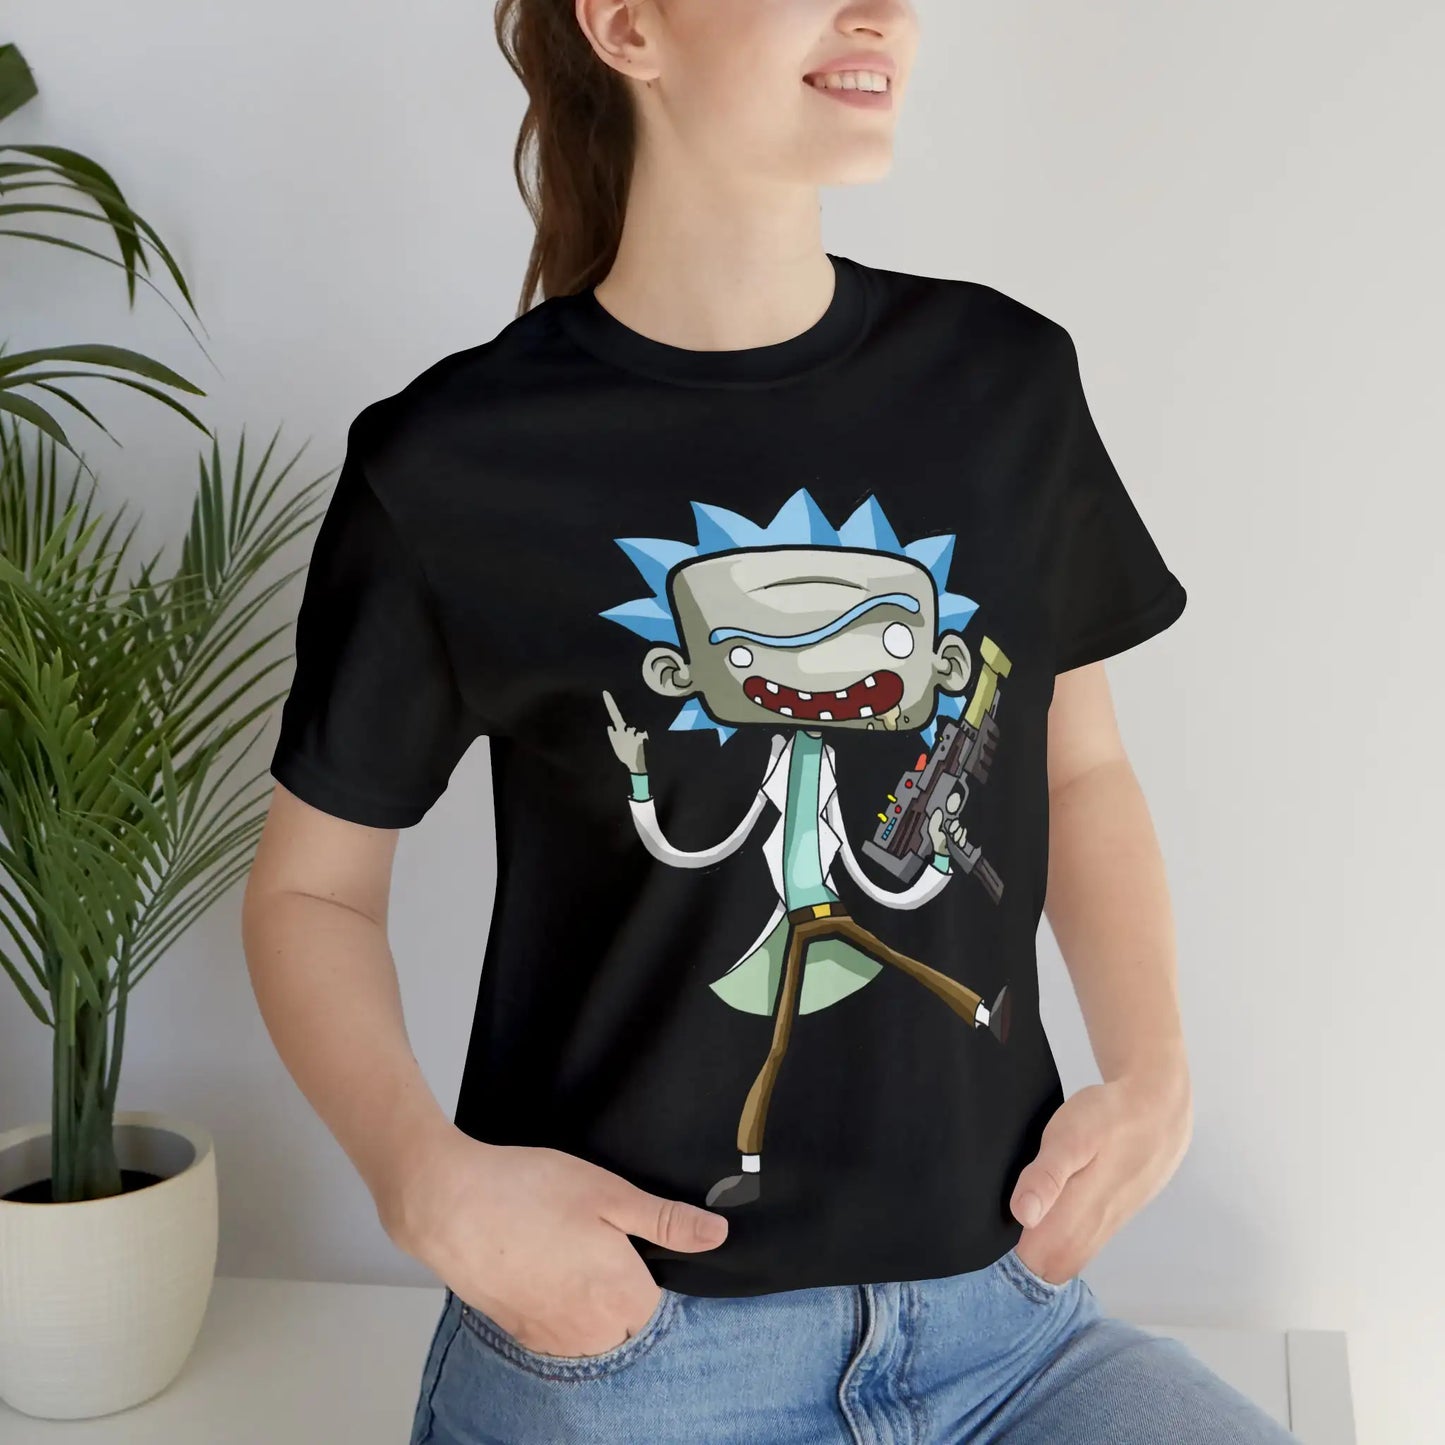 Rick and Morty Middle Finger Rick Cartoon Parody Tee Unisex For Men and Women